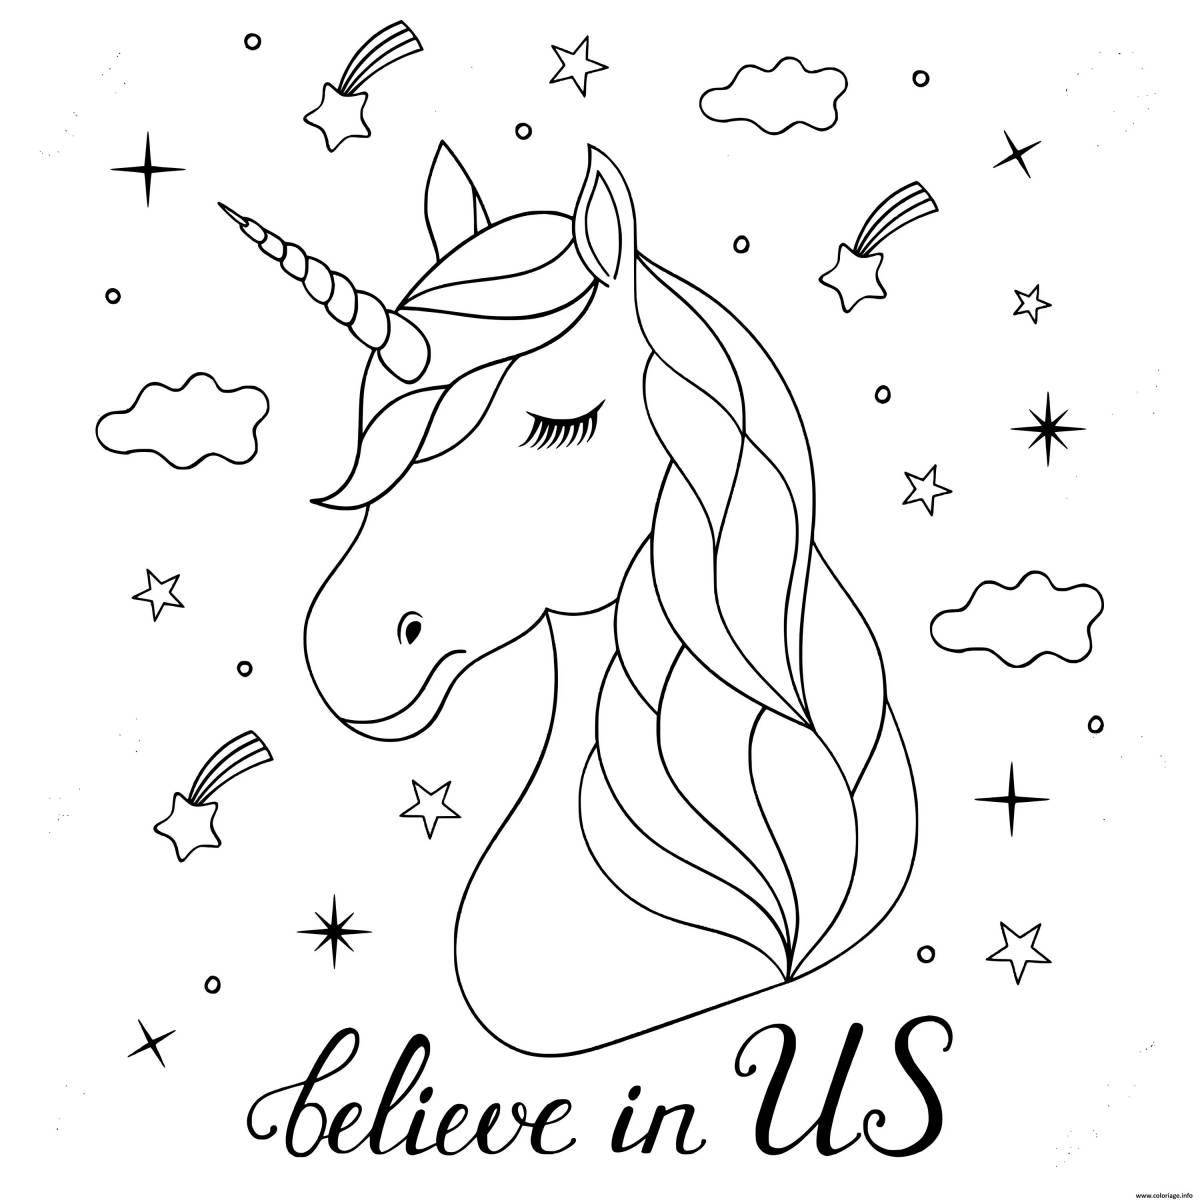 Intriguing coloring book include unicorns